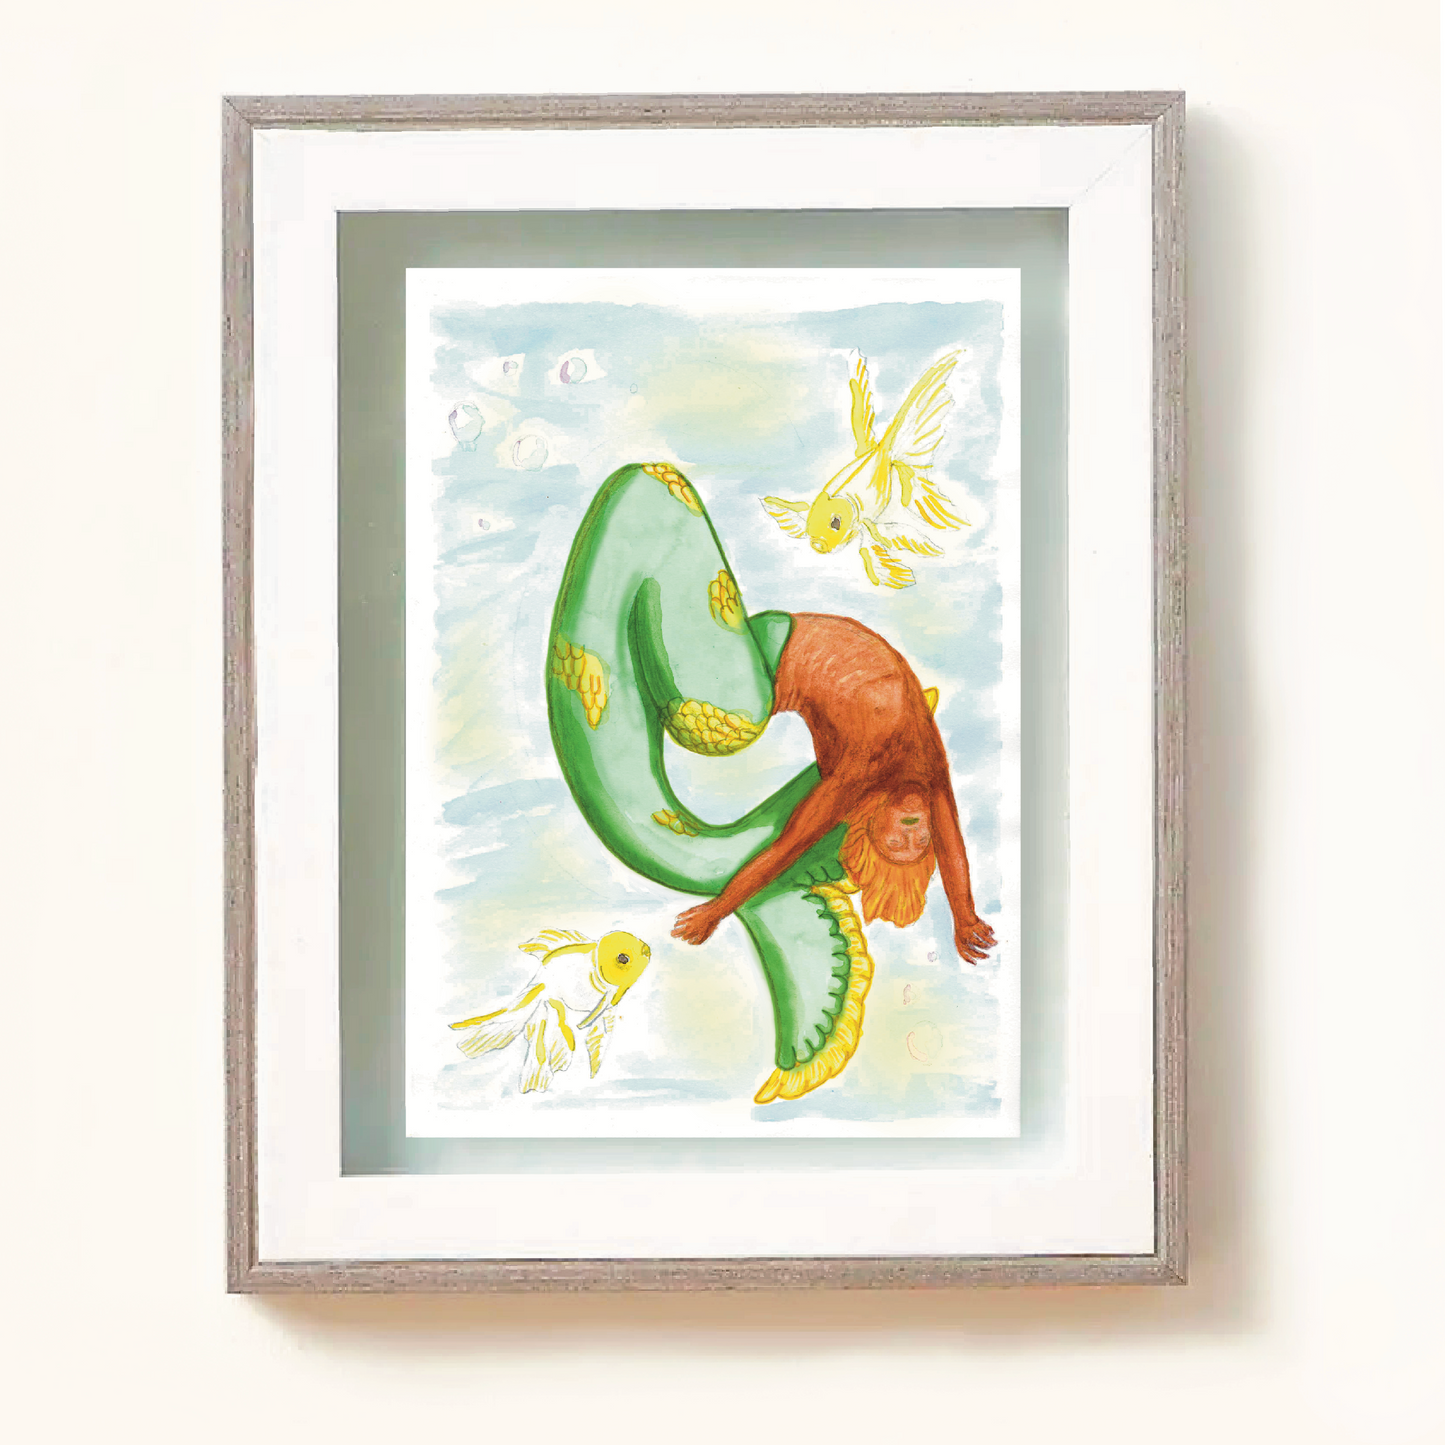 Framed art print of Citrus mermaid. Citrus mermaid dancing in a whirlwind shape bending backwards accompanied by two white and yellow goldfiish. Citrus has orange toned skin and a green tail with patches of yellow scales.